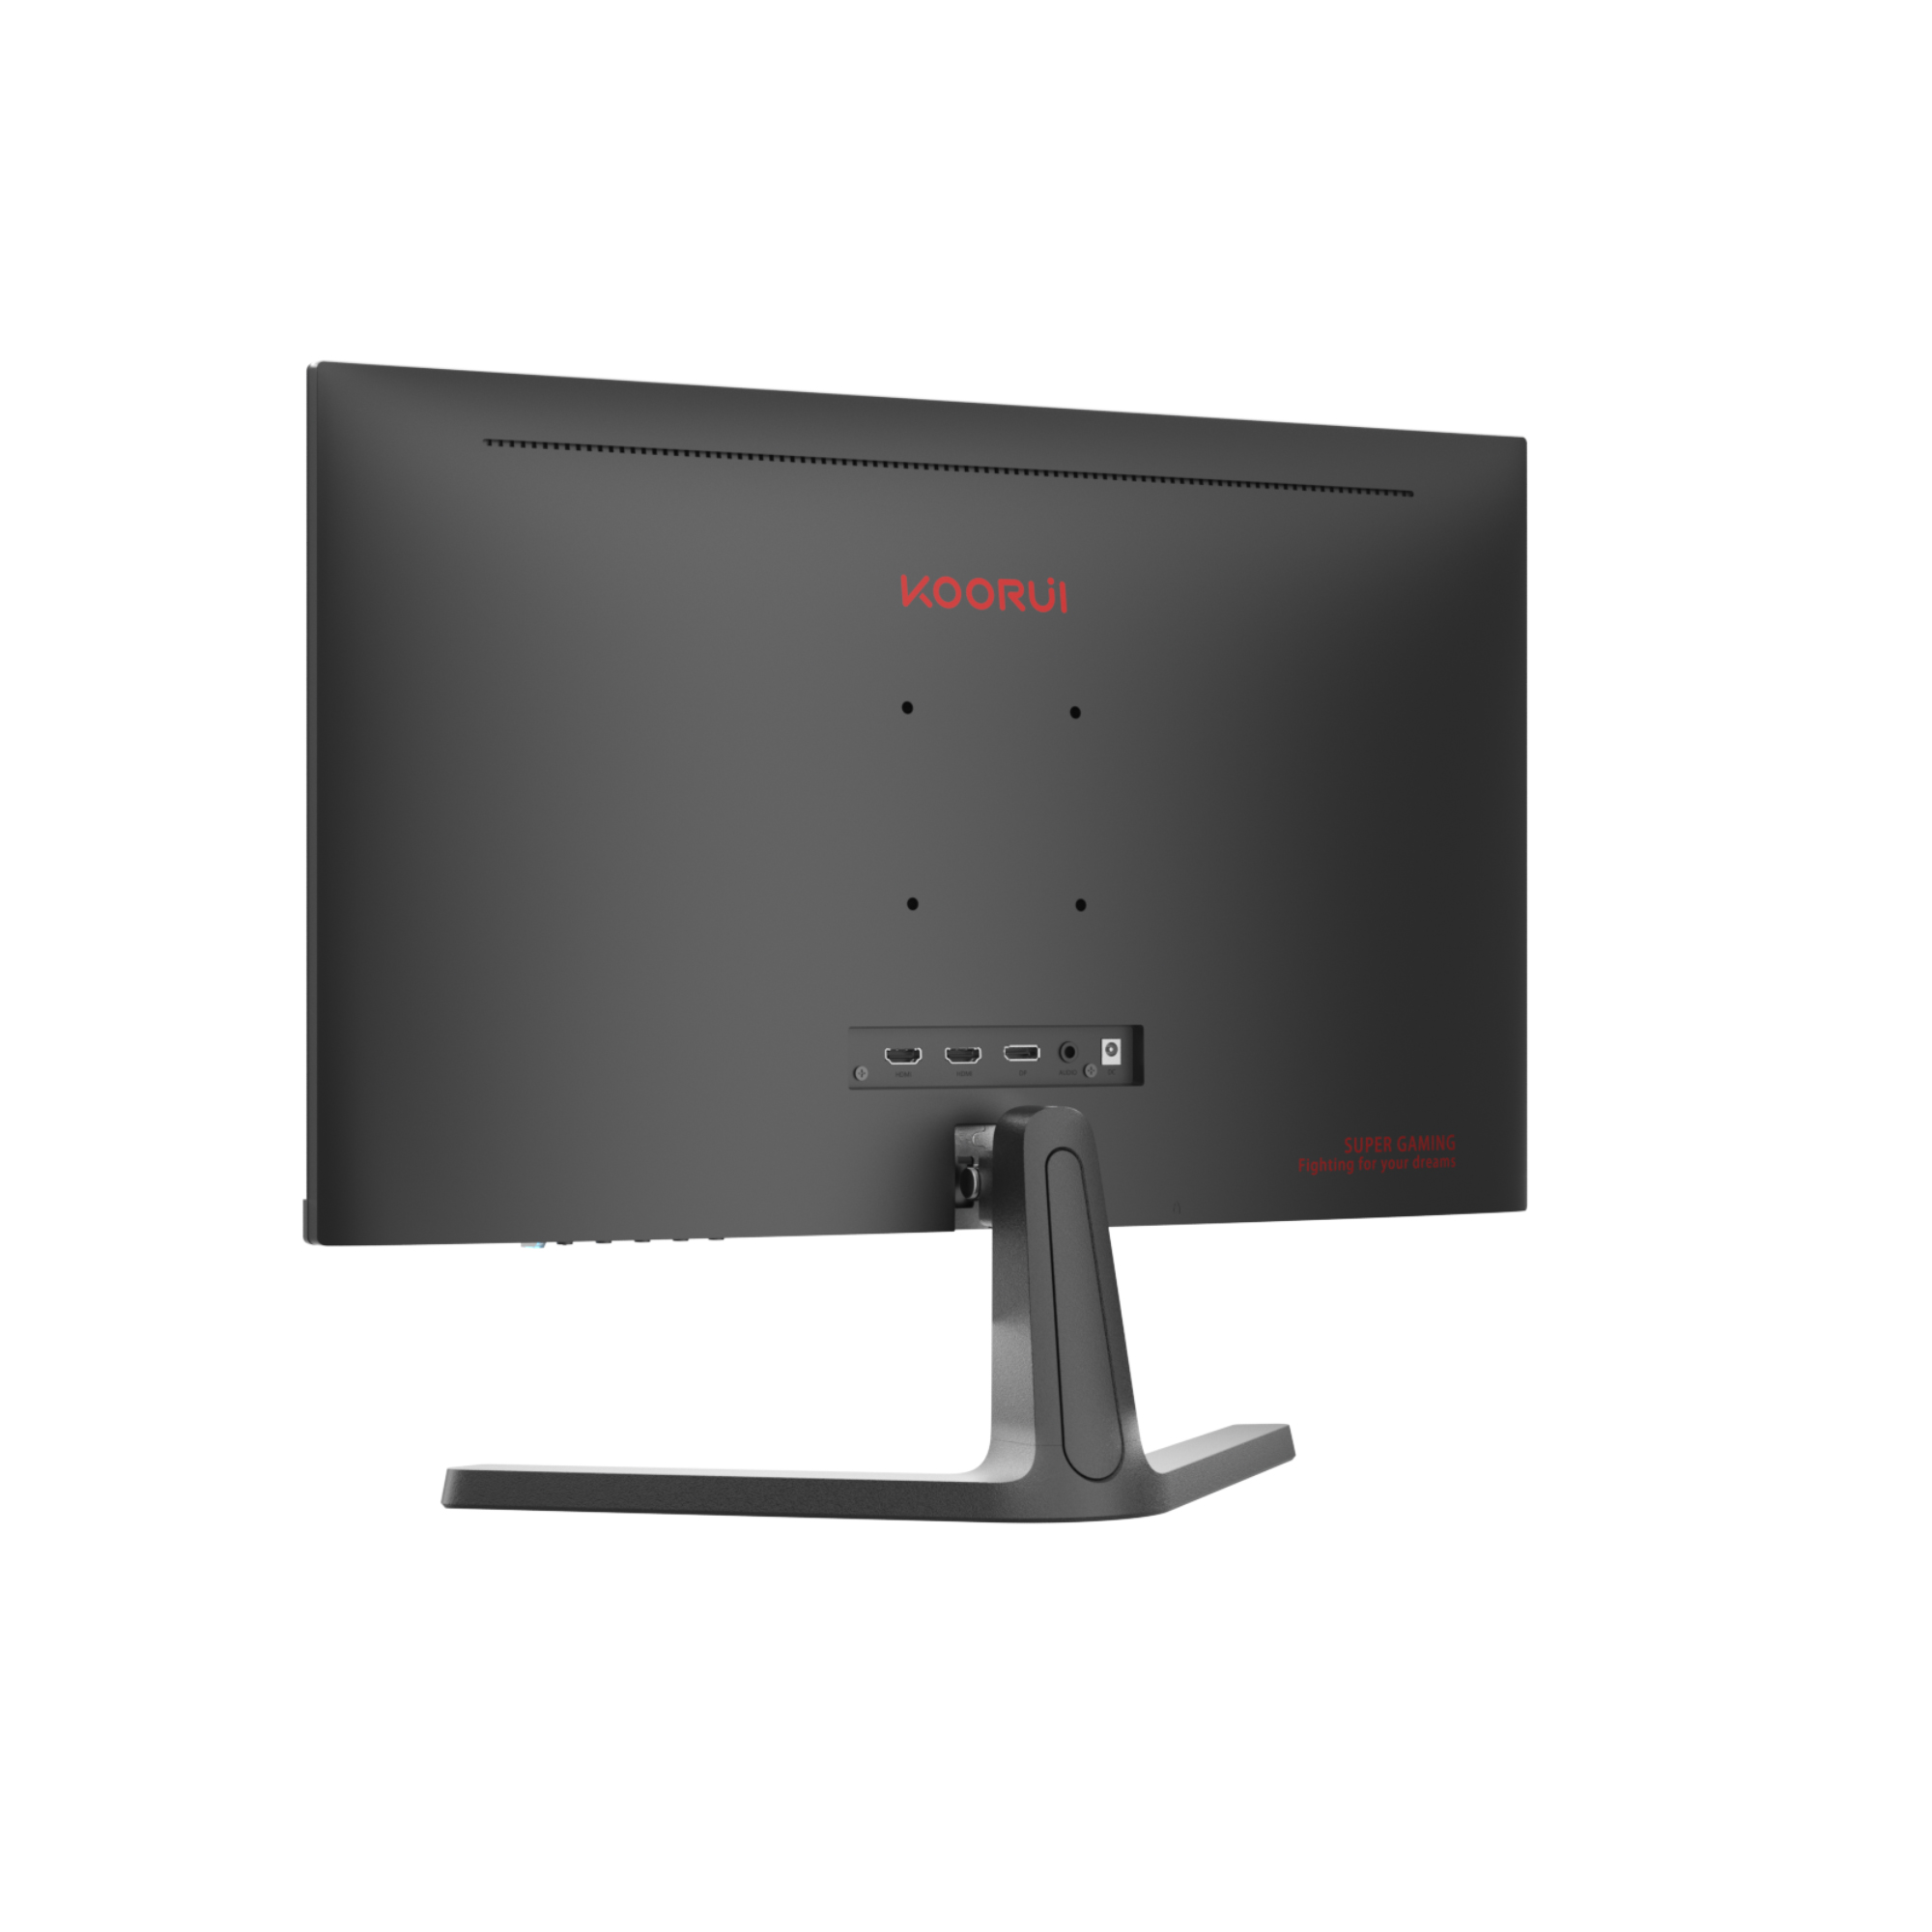 KOORUI 24 Gaming Gaming Monitor 144hz 165Hz/144Hz, 1080p, 1ms Response  Time, IPS Display, FreeSync & G Sync Compatible For PC From Galaxytoys,  $1,547.33